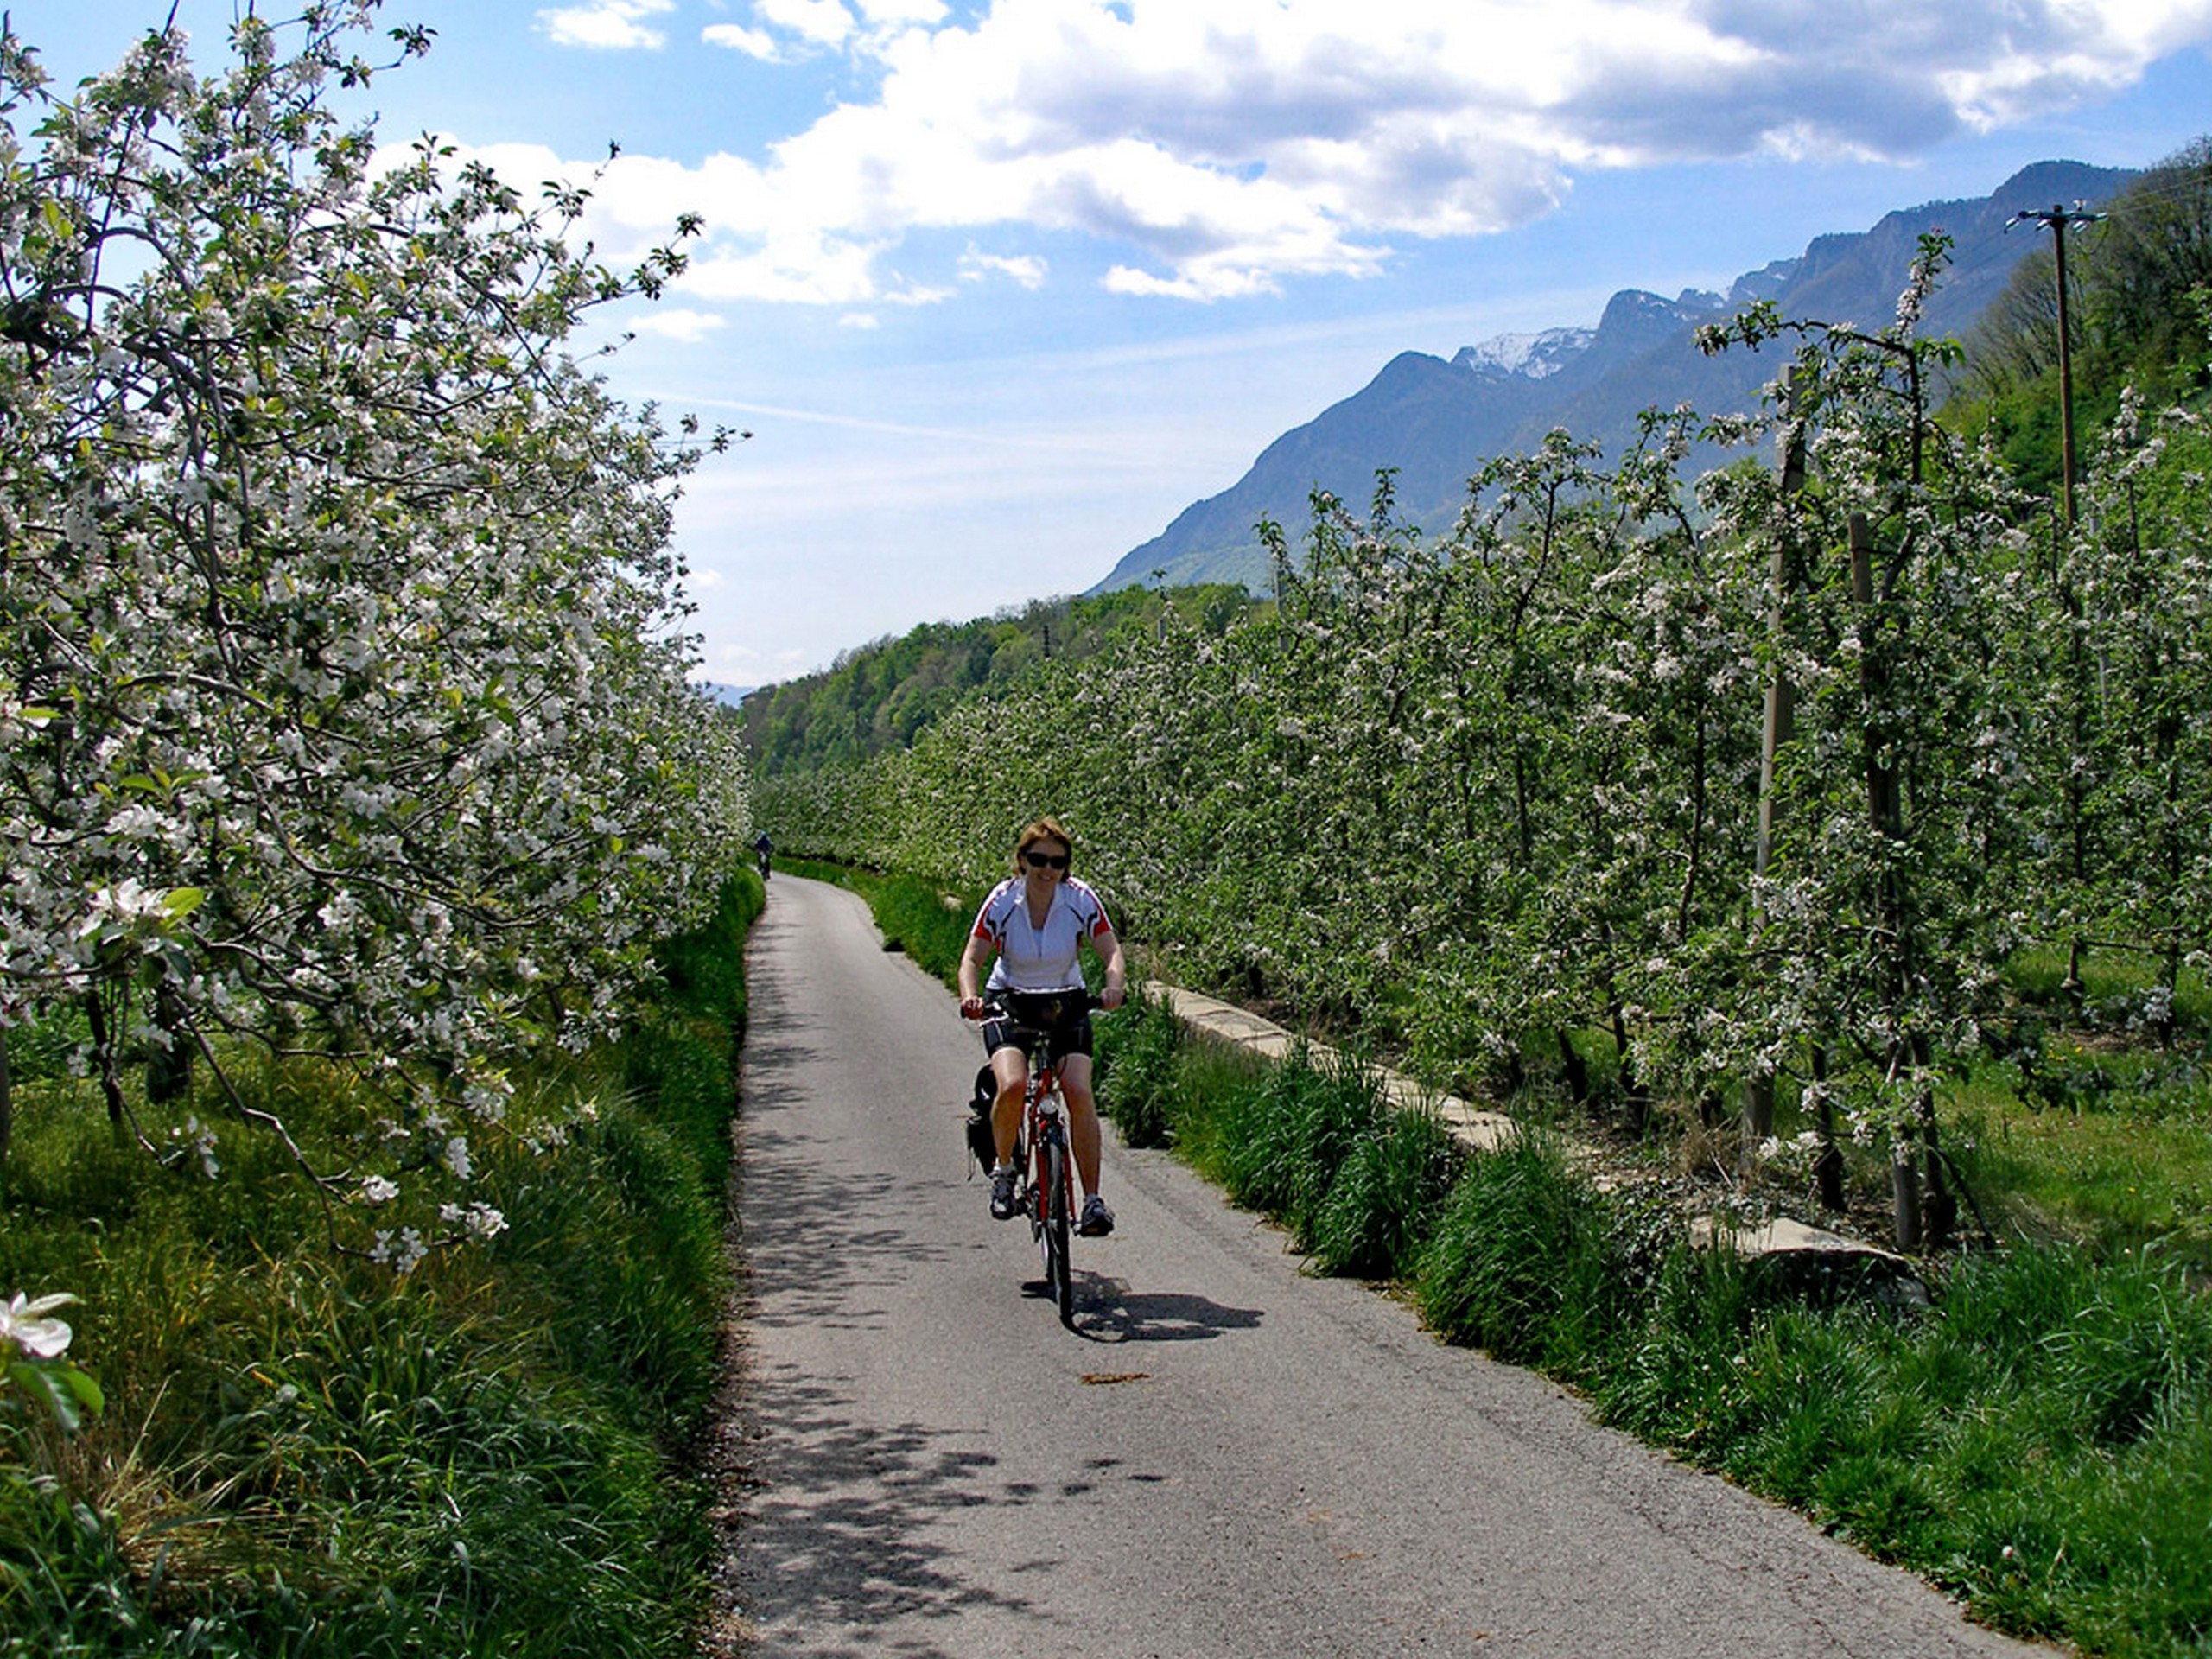 Biking path along the fruit tree forests in South Tyrol, Austria